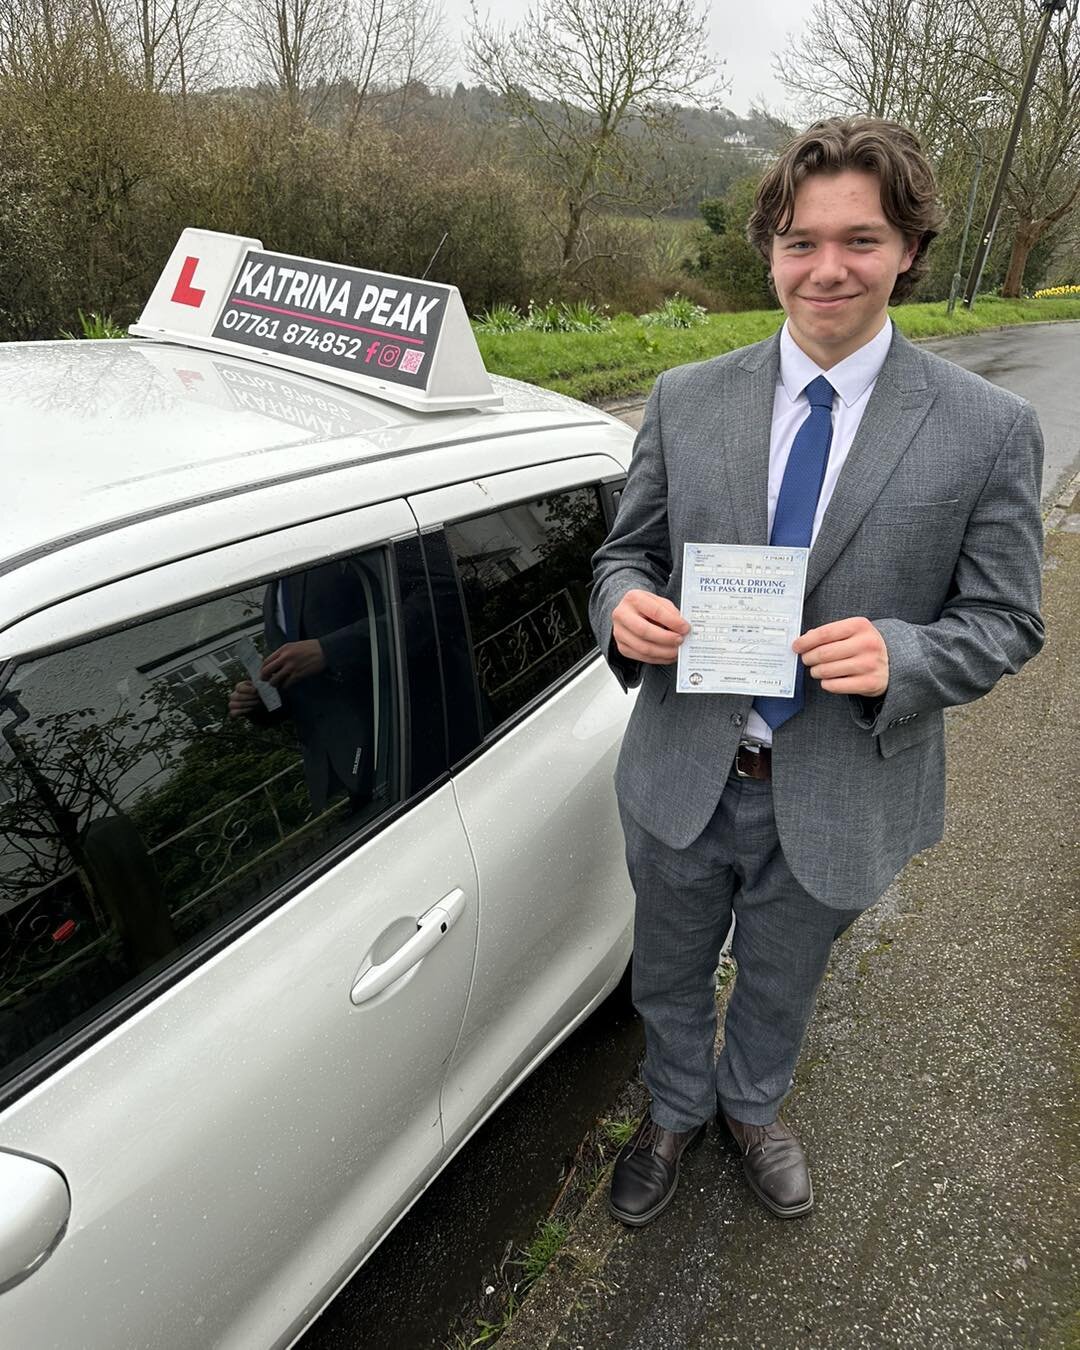 Well done Harry, amazing driving today in truly awful weather conditions! You showed what a great driver you are and thoroughly deserve your driving test pass only scoring 2 driving faults! Look forward to seeing you on the road! 🥳🎉🚗🚙 #learntodri